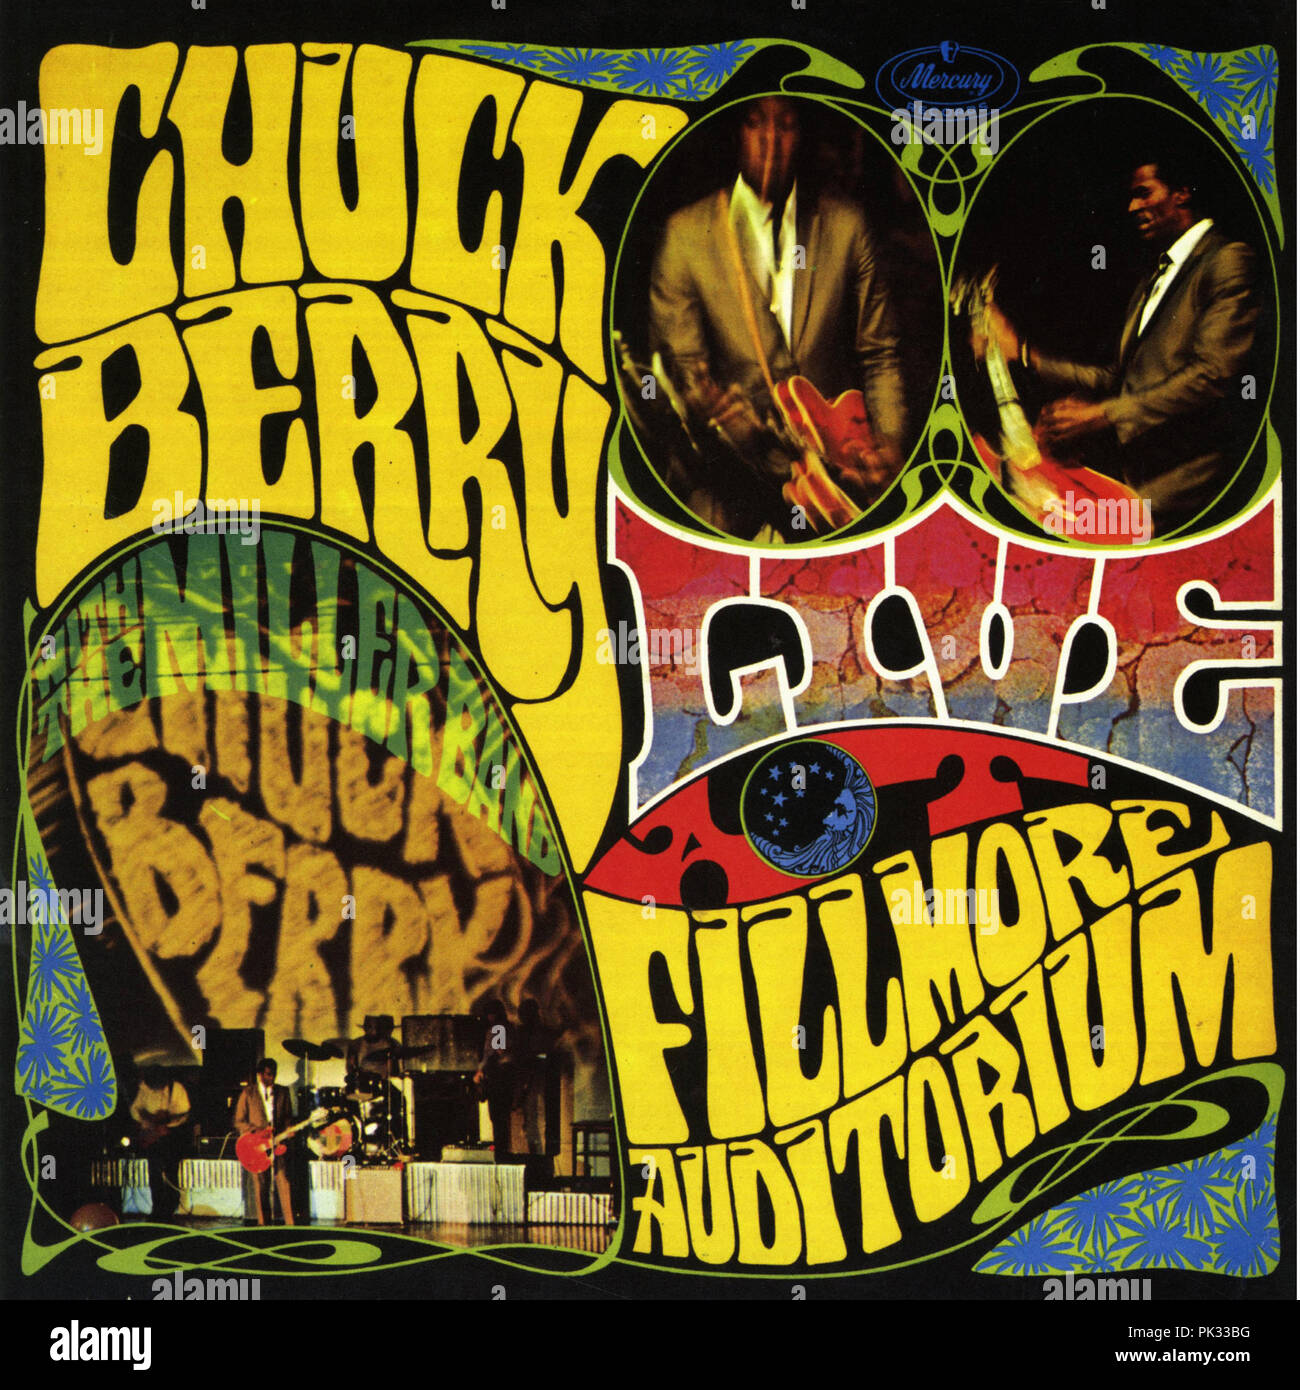 vintage vinyl record album - Chuck Berry - Live at the Fillmore West - 1967  Stock Photo - Alamy